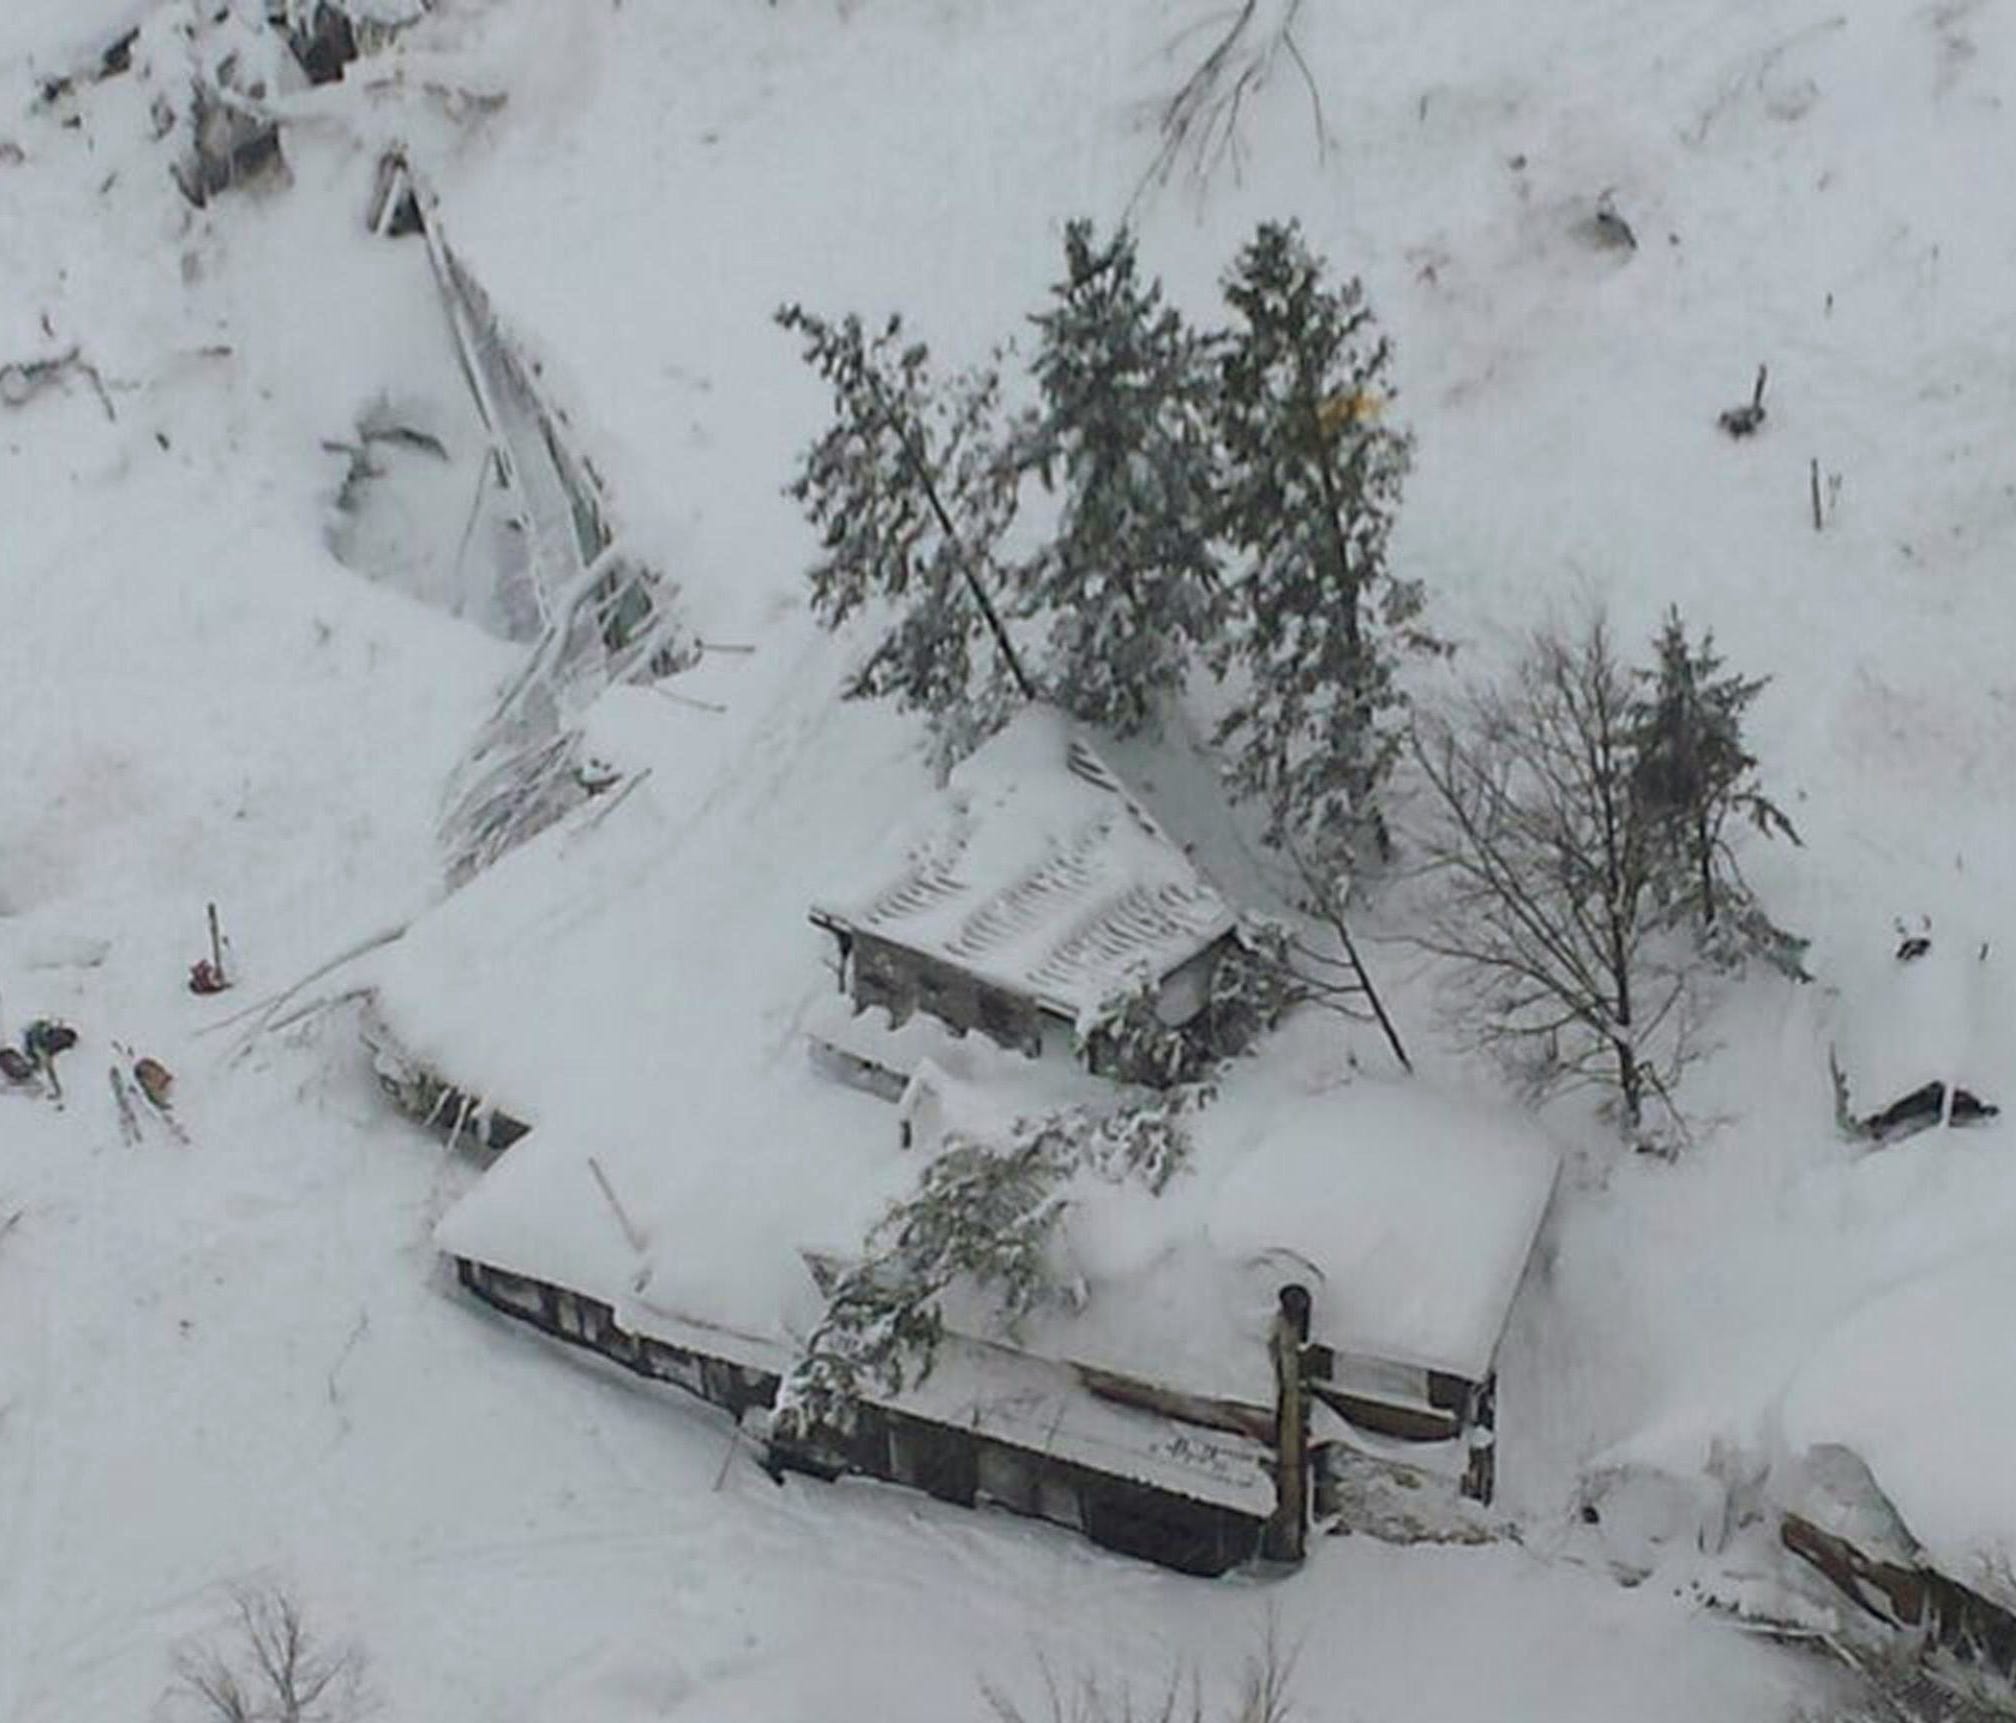 An aerial view of the Rigopiano Hotel hit by an avalanche in Farindola, Italy, early Thursday, Jan. 19, 2017.